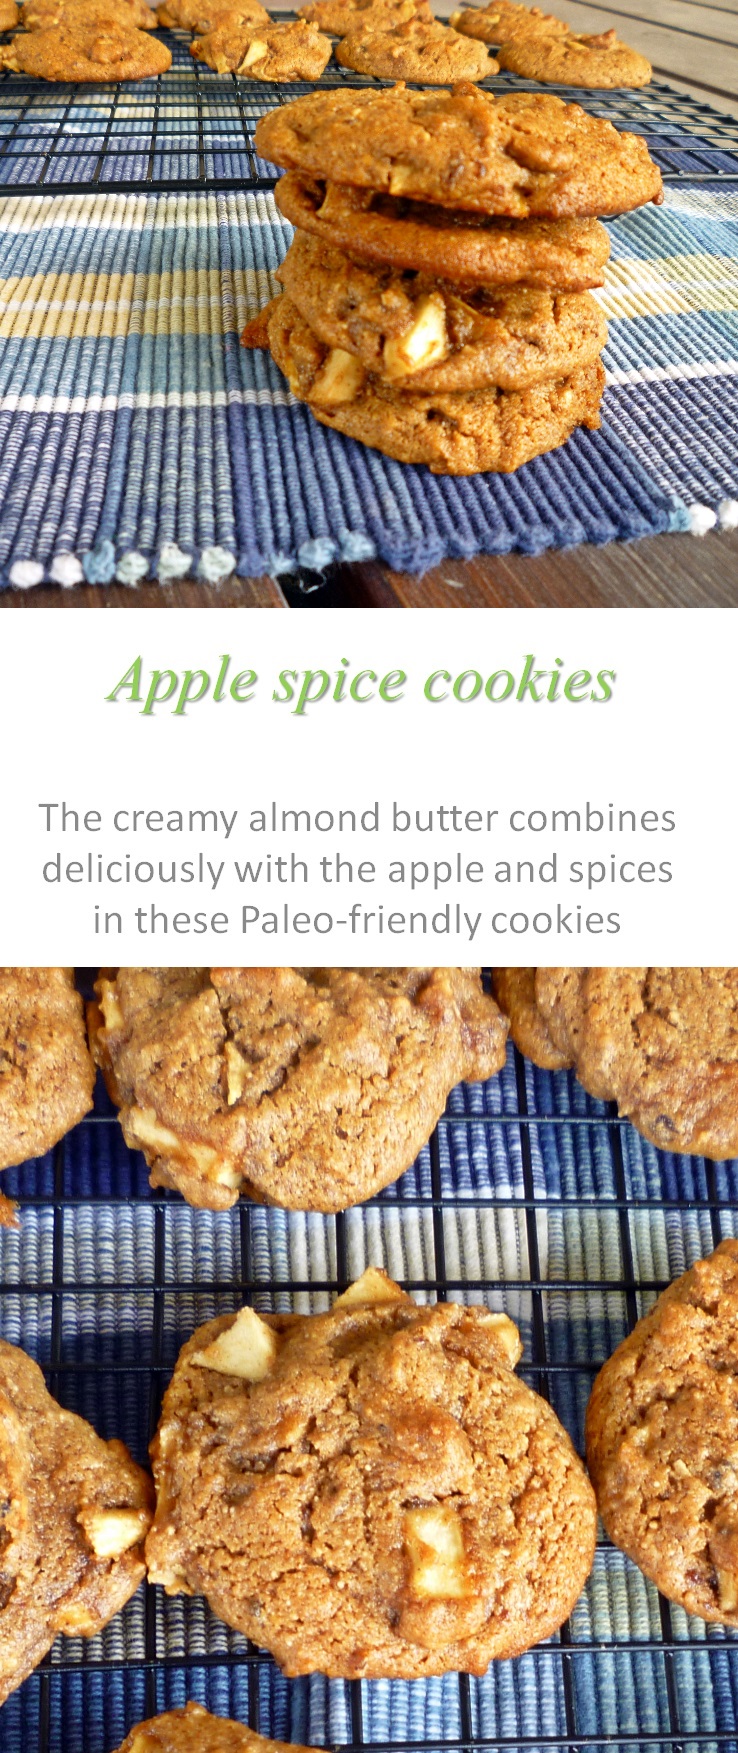 Apple spice cookies, made with Paleo-friendly ingredients, bring magic to your mouth any time of the year! #cookies